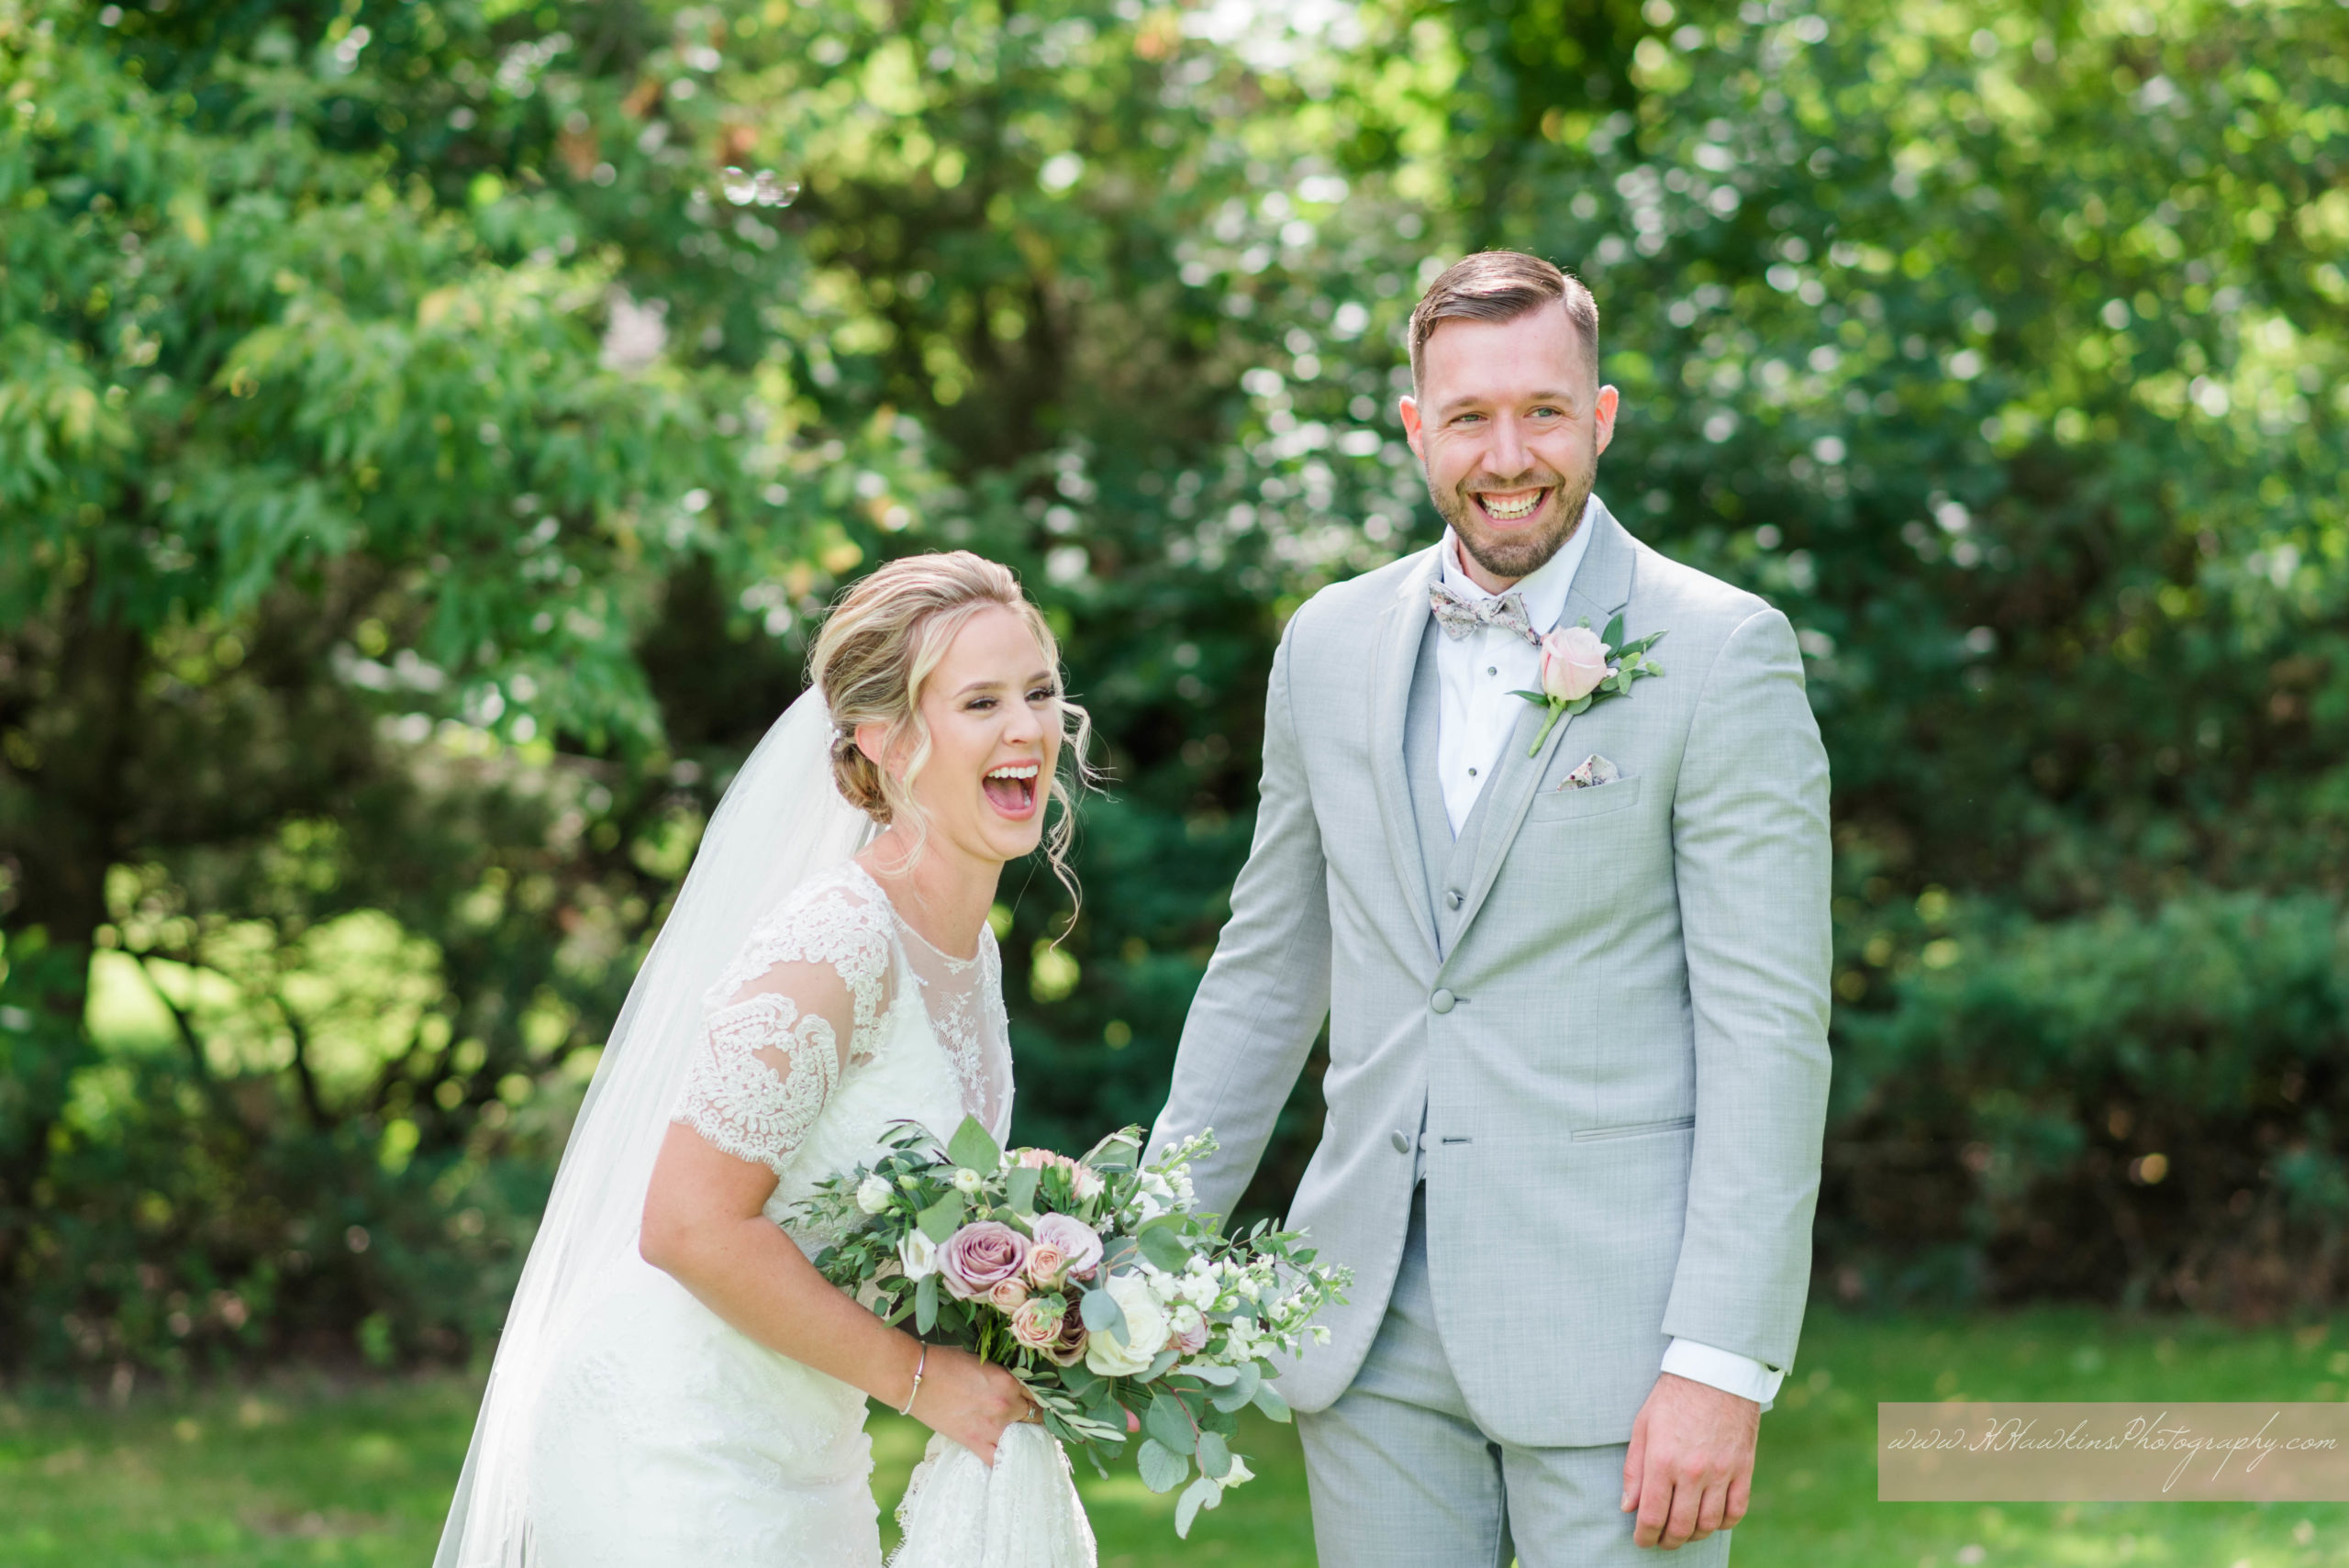 First look of bride in Olia Zavozina wedding dress and groom in grey tux at their castle wedding venue